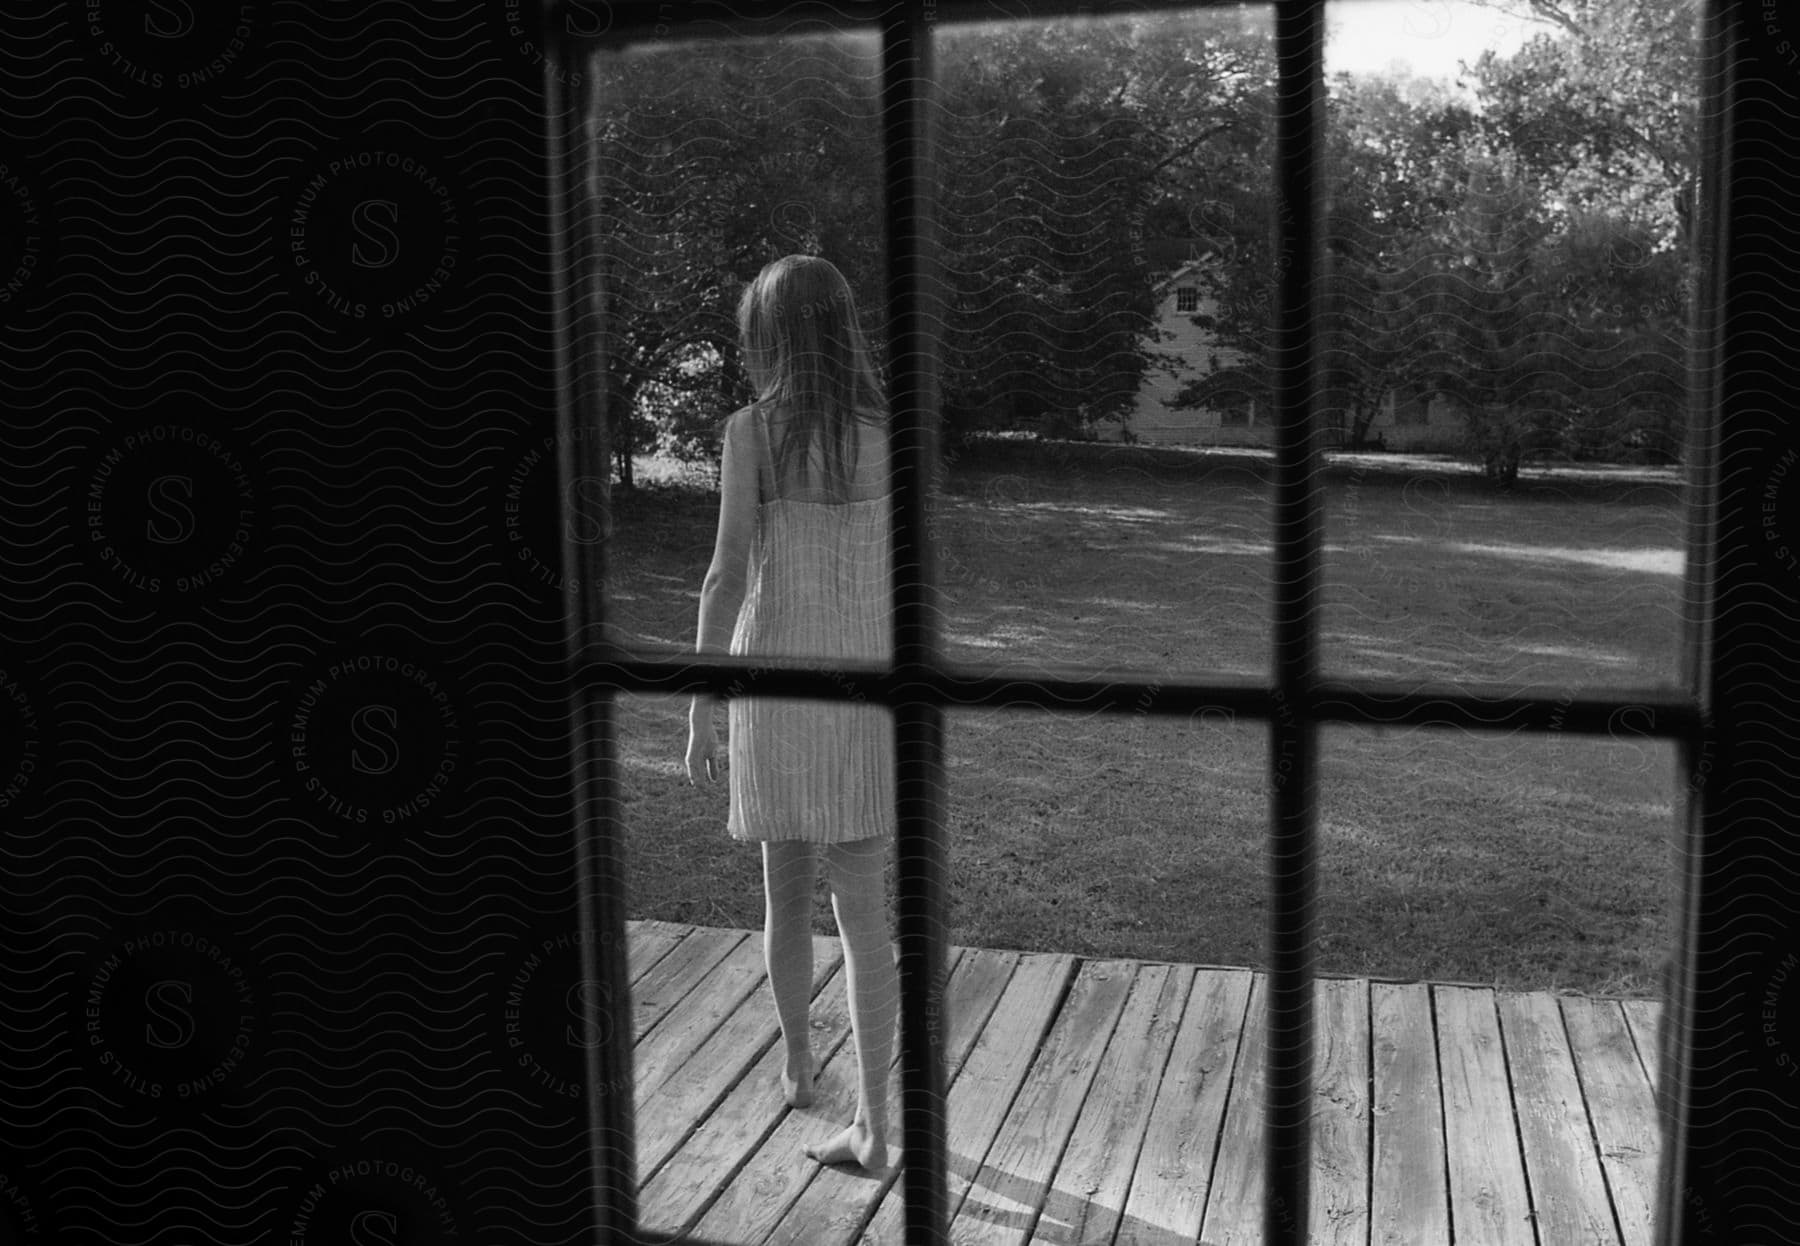 A barefoot girl stands on a deck looking out a window